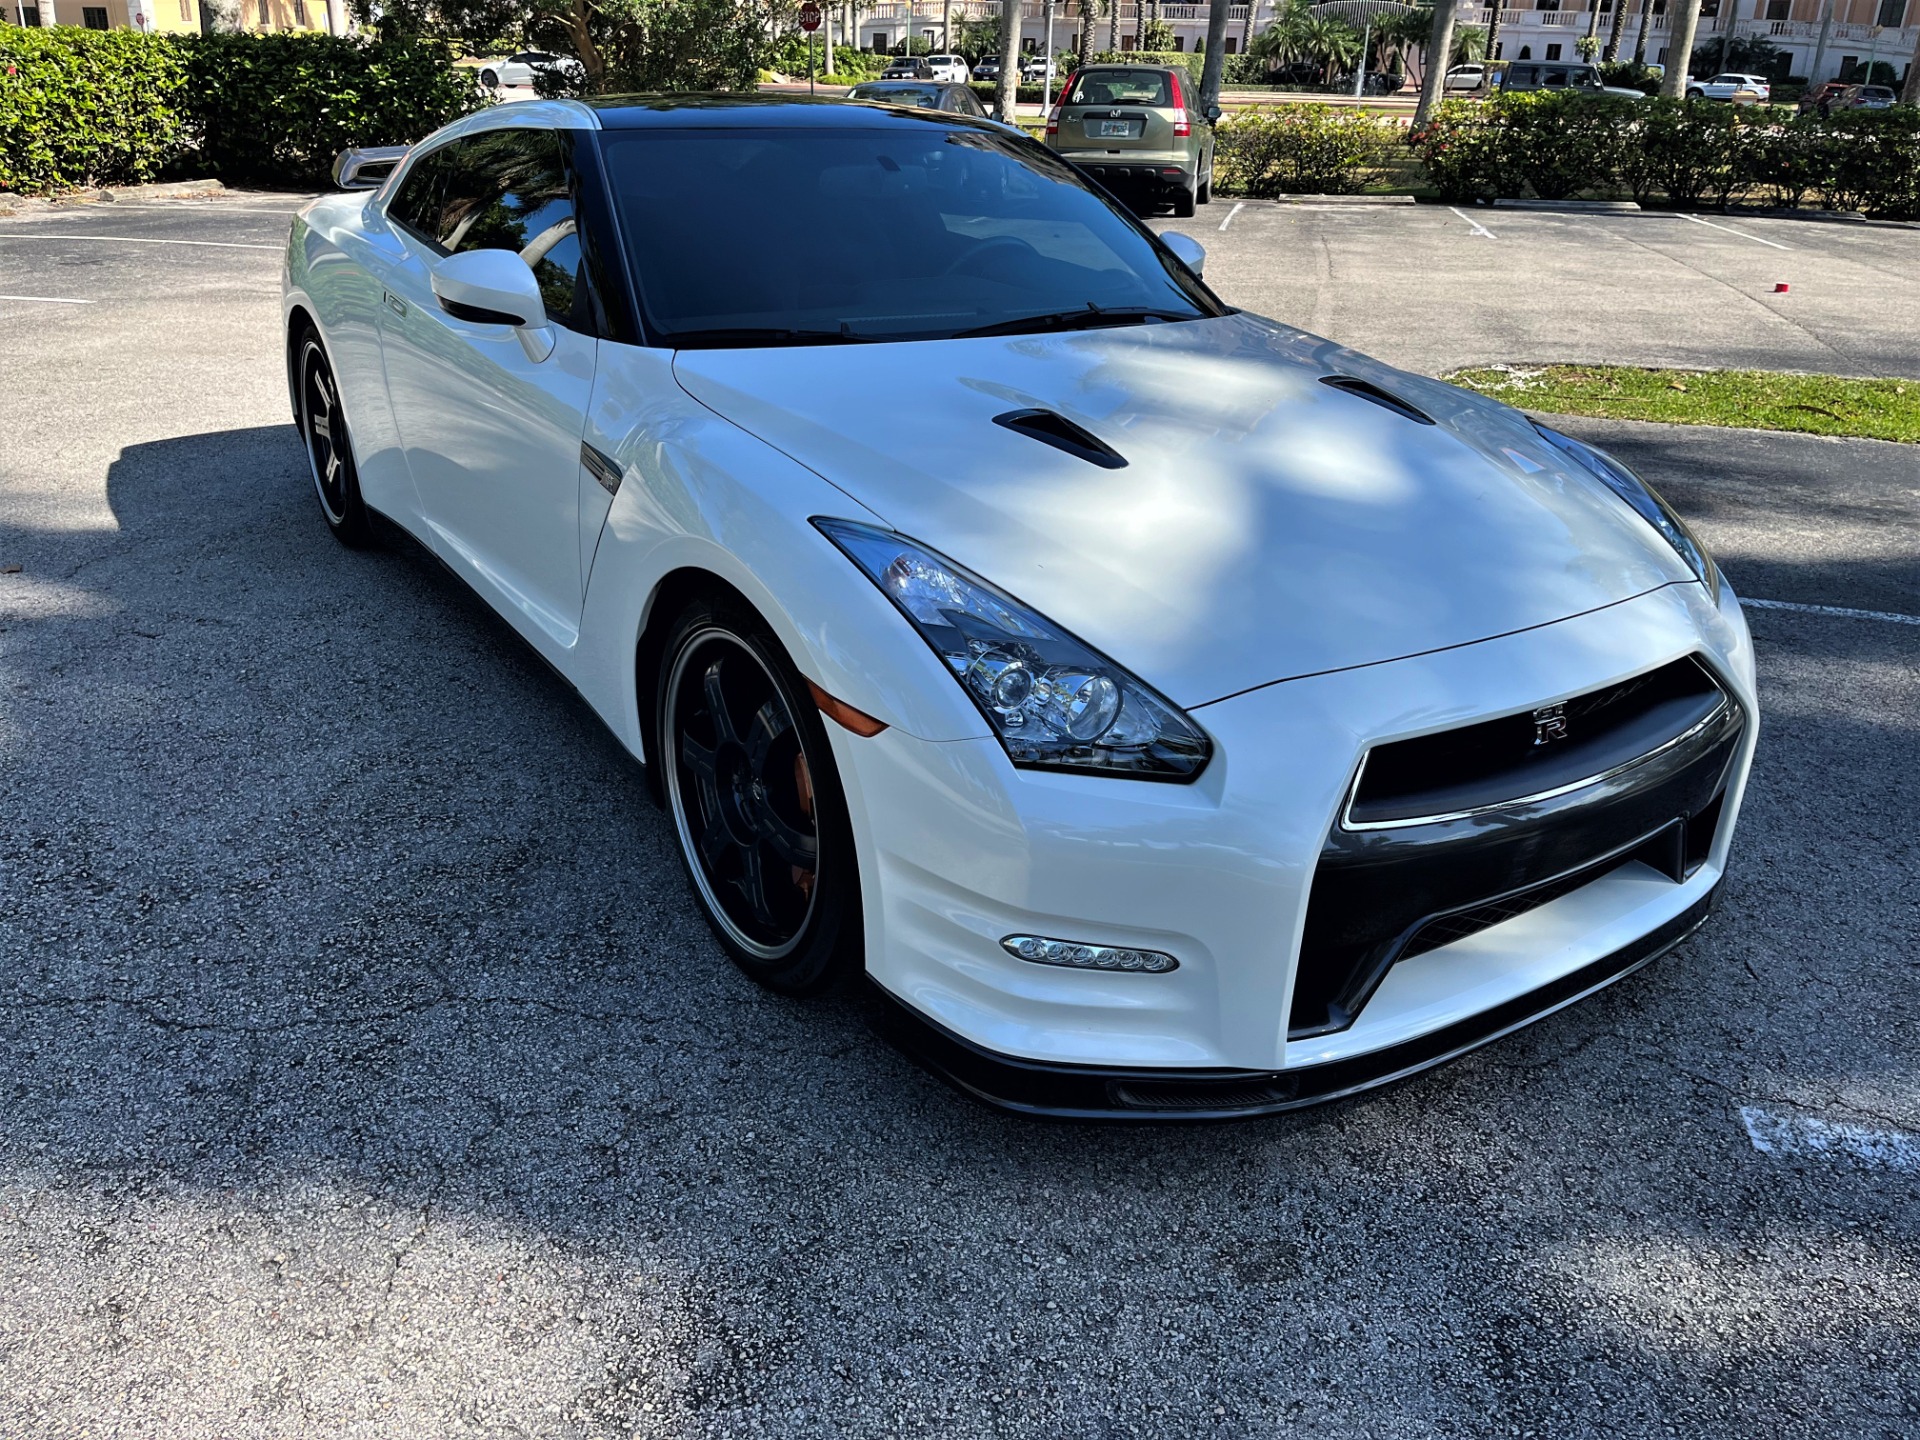 Used 2014 Nissan GT-R Track Edition for sale Sold at The Gables Sports Cars in Miami FL 33146 4